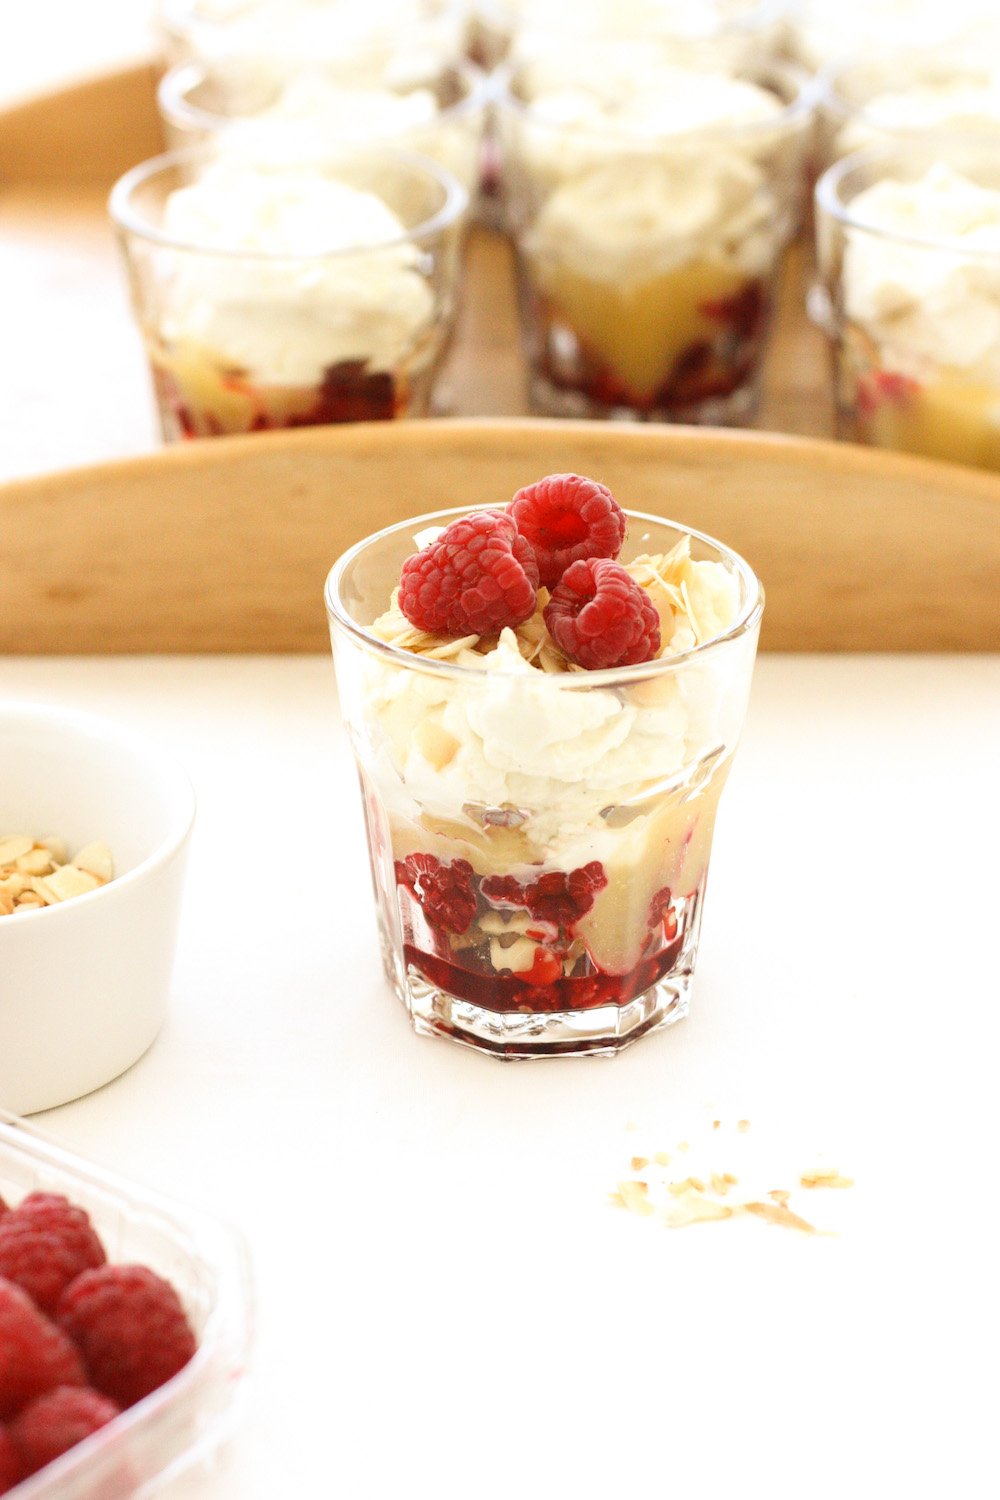 An Easy Lemon and Raspberry Cheesecake in a glass in front of a wooden tray